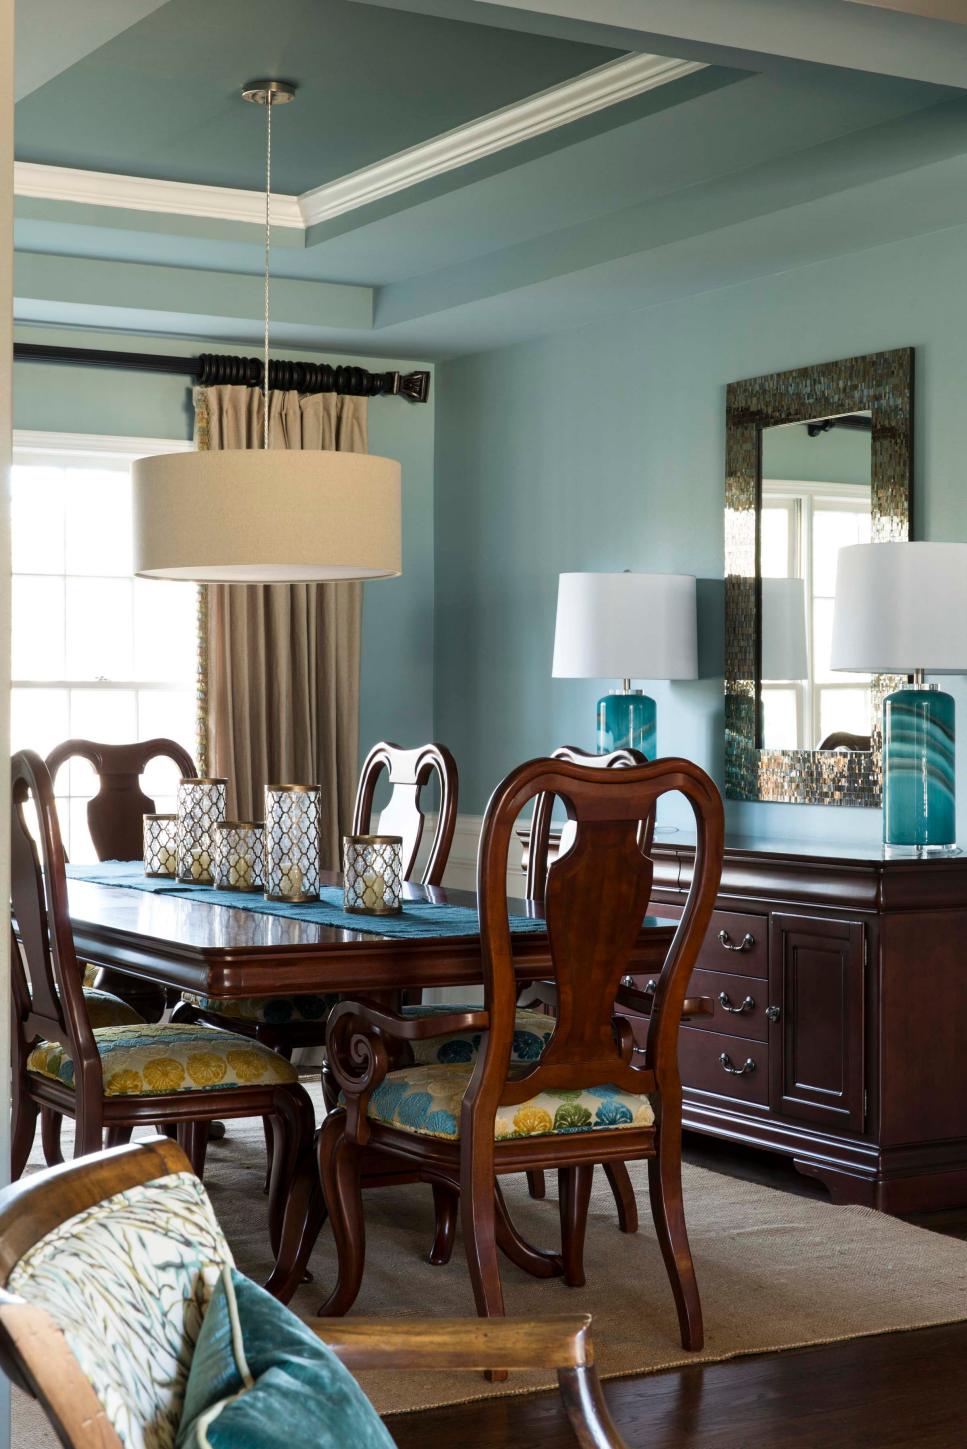 Traditional and Neutral Dining Room with Pop of Color | HGTV